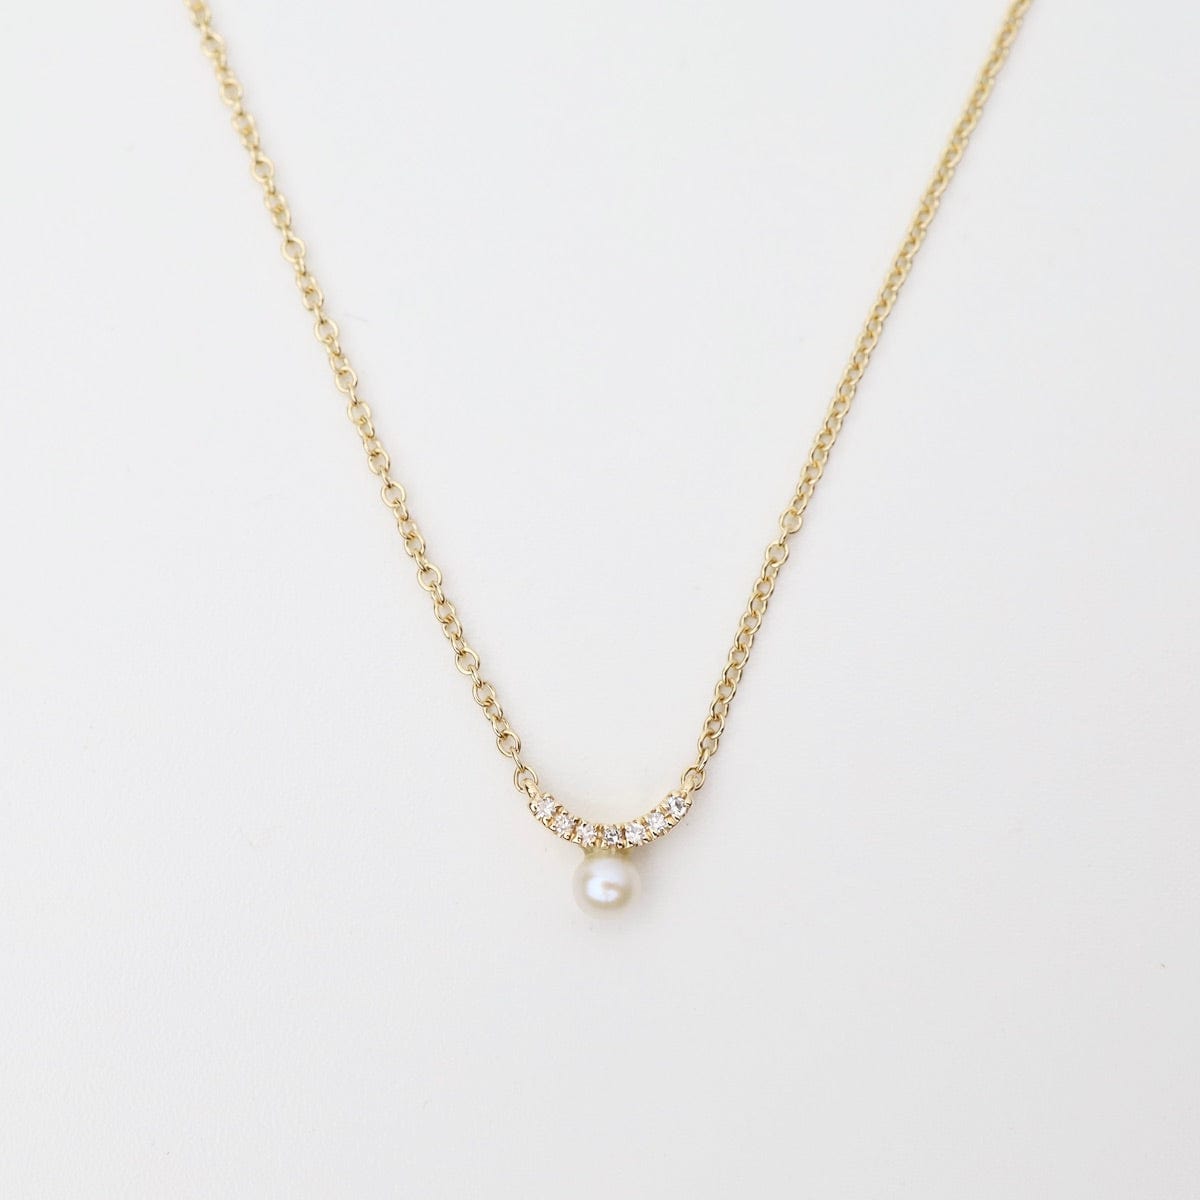 NKL-14K Mini Curve Diamond Bar with Pearl Necklace